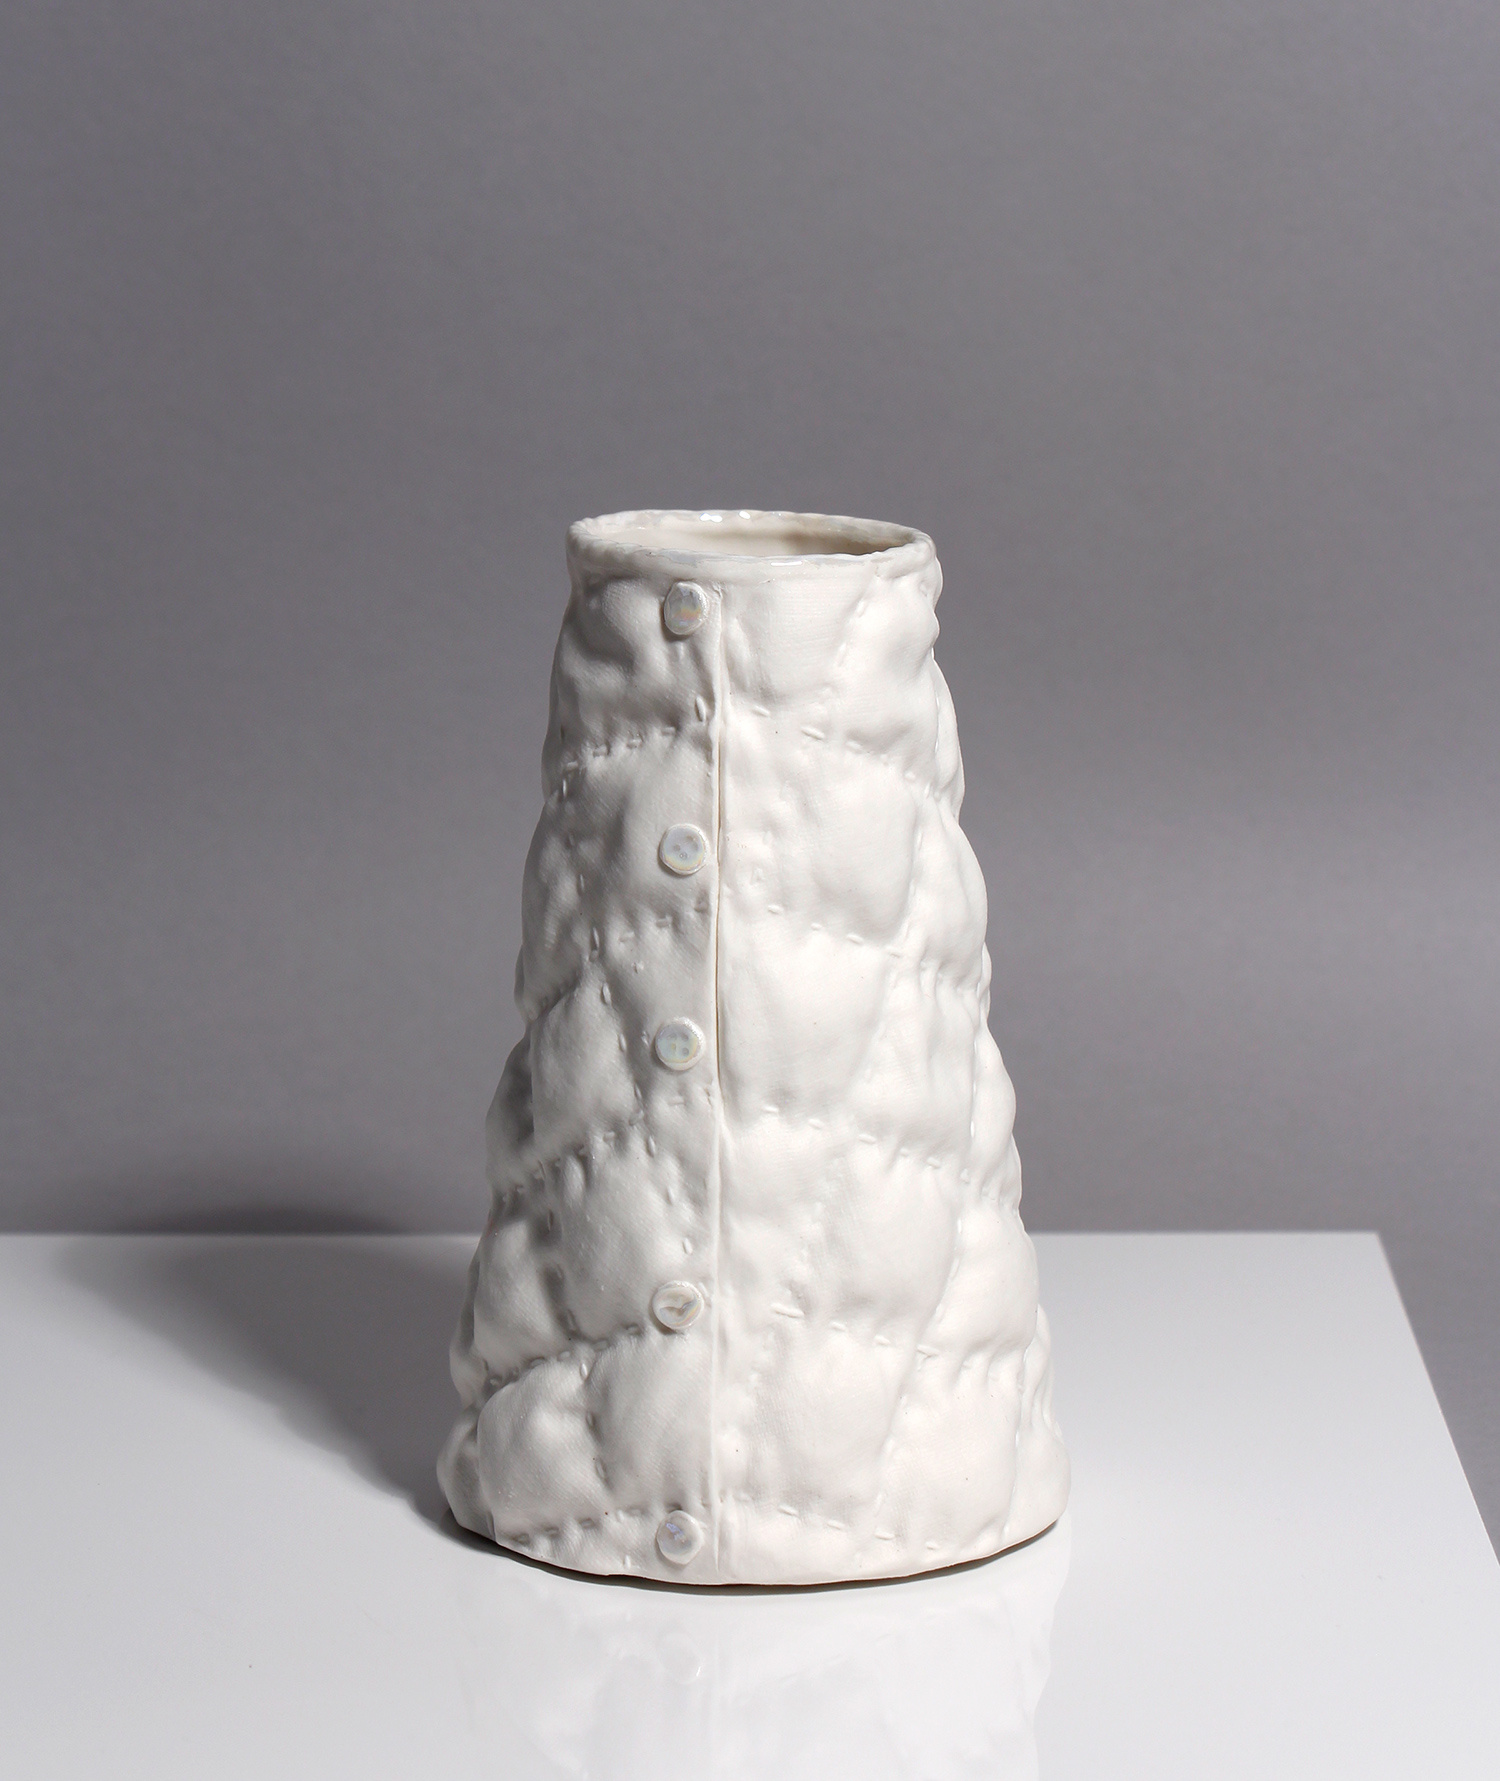 Stitched Quilting Conical Vase by Sarah Grove